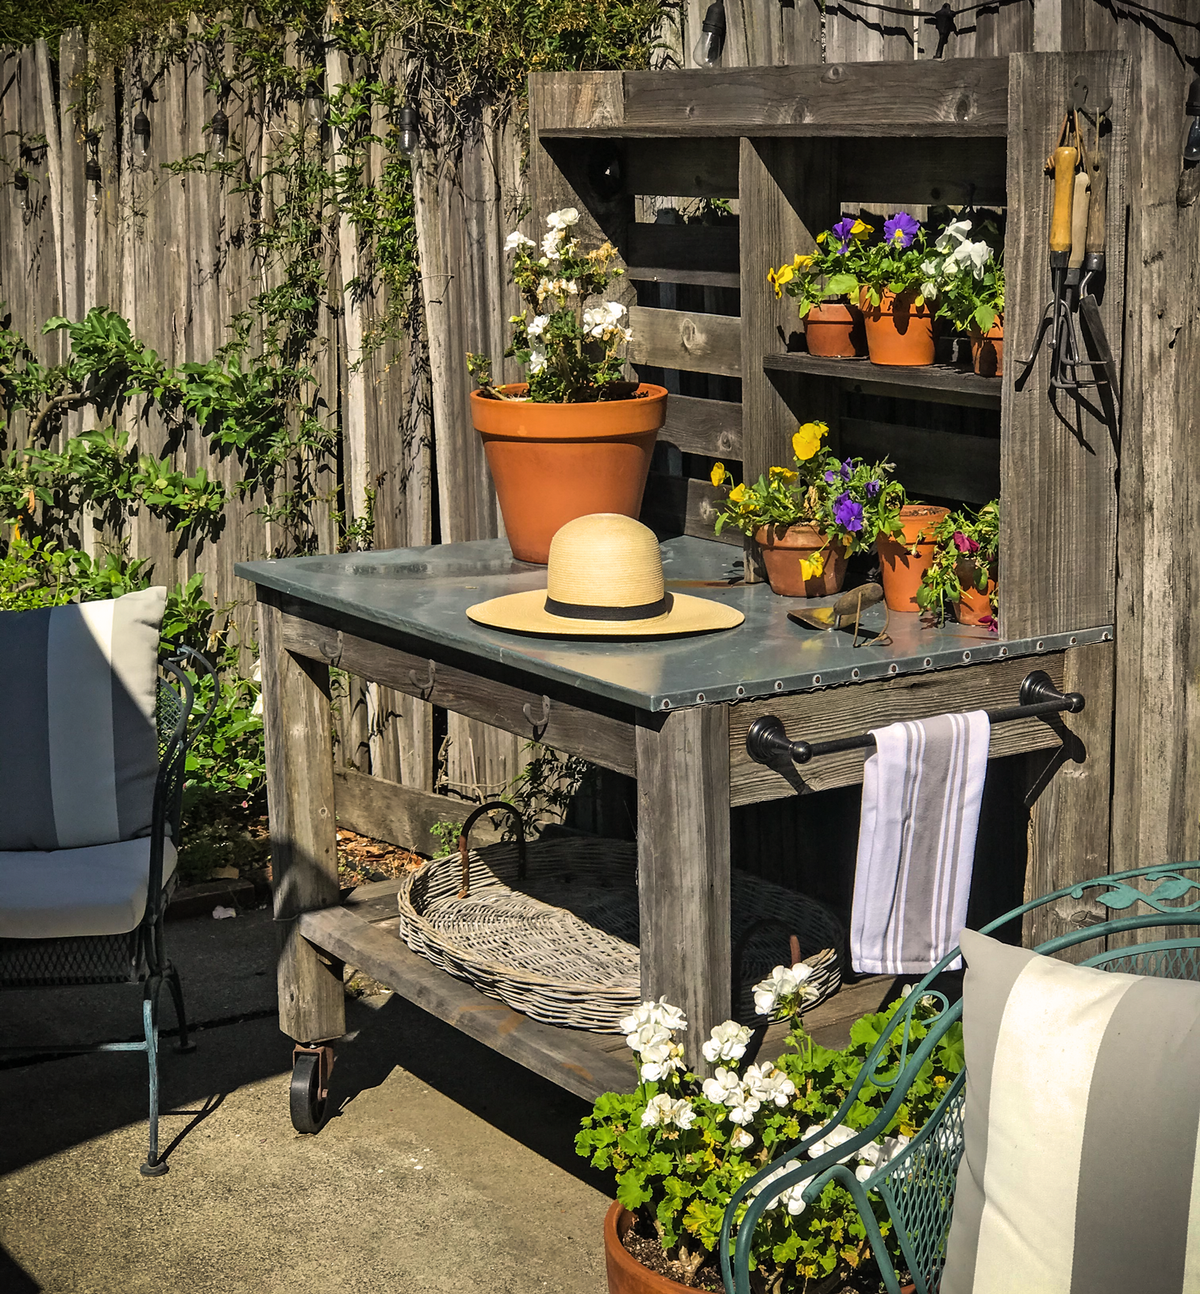 Lee Display's Gardening Potting Table Design to Make your Lives Better for Quarantining on Sale by Lee Display